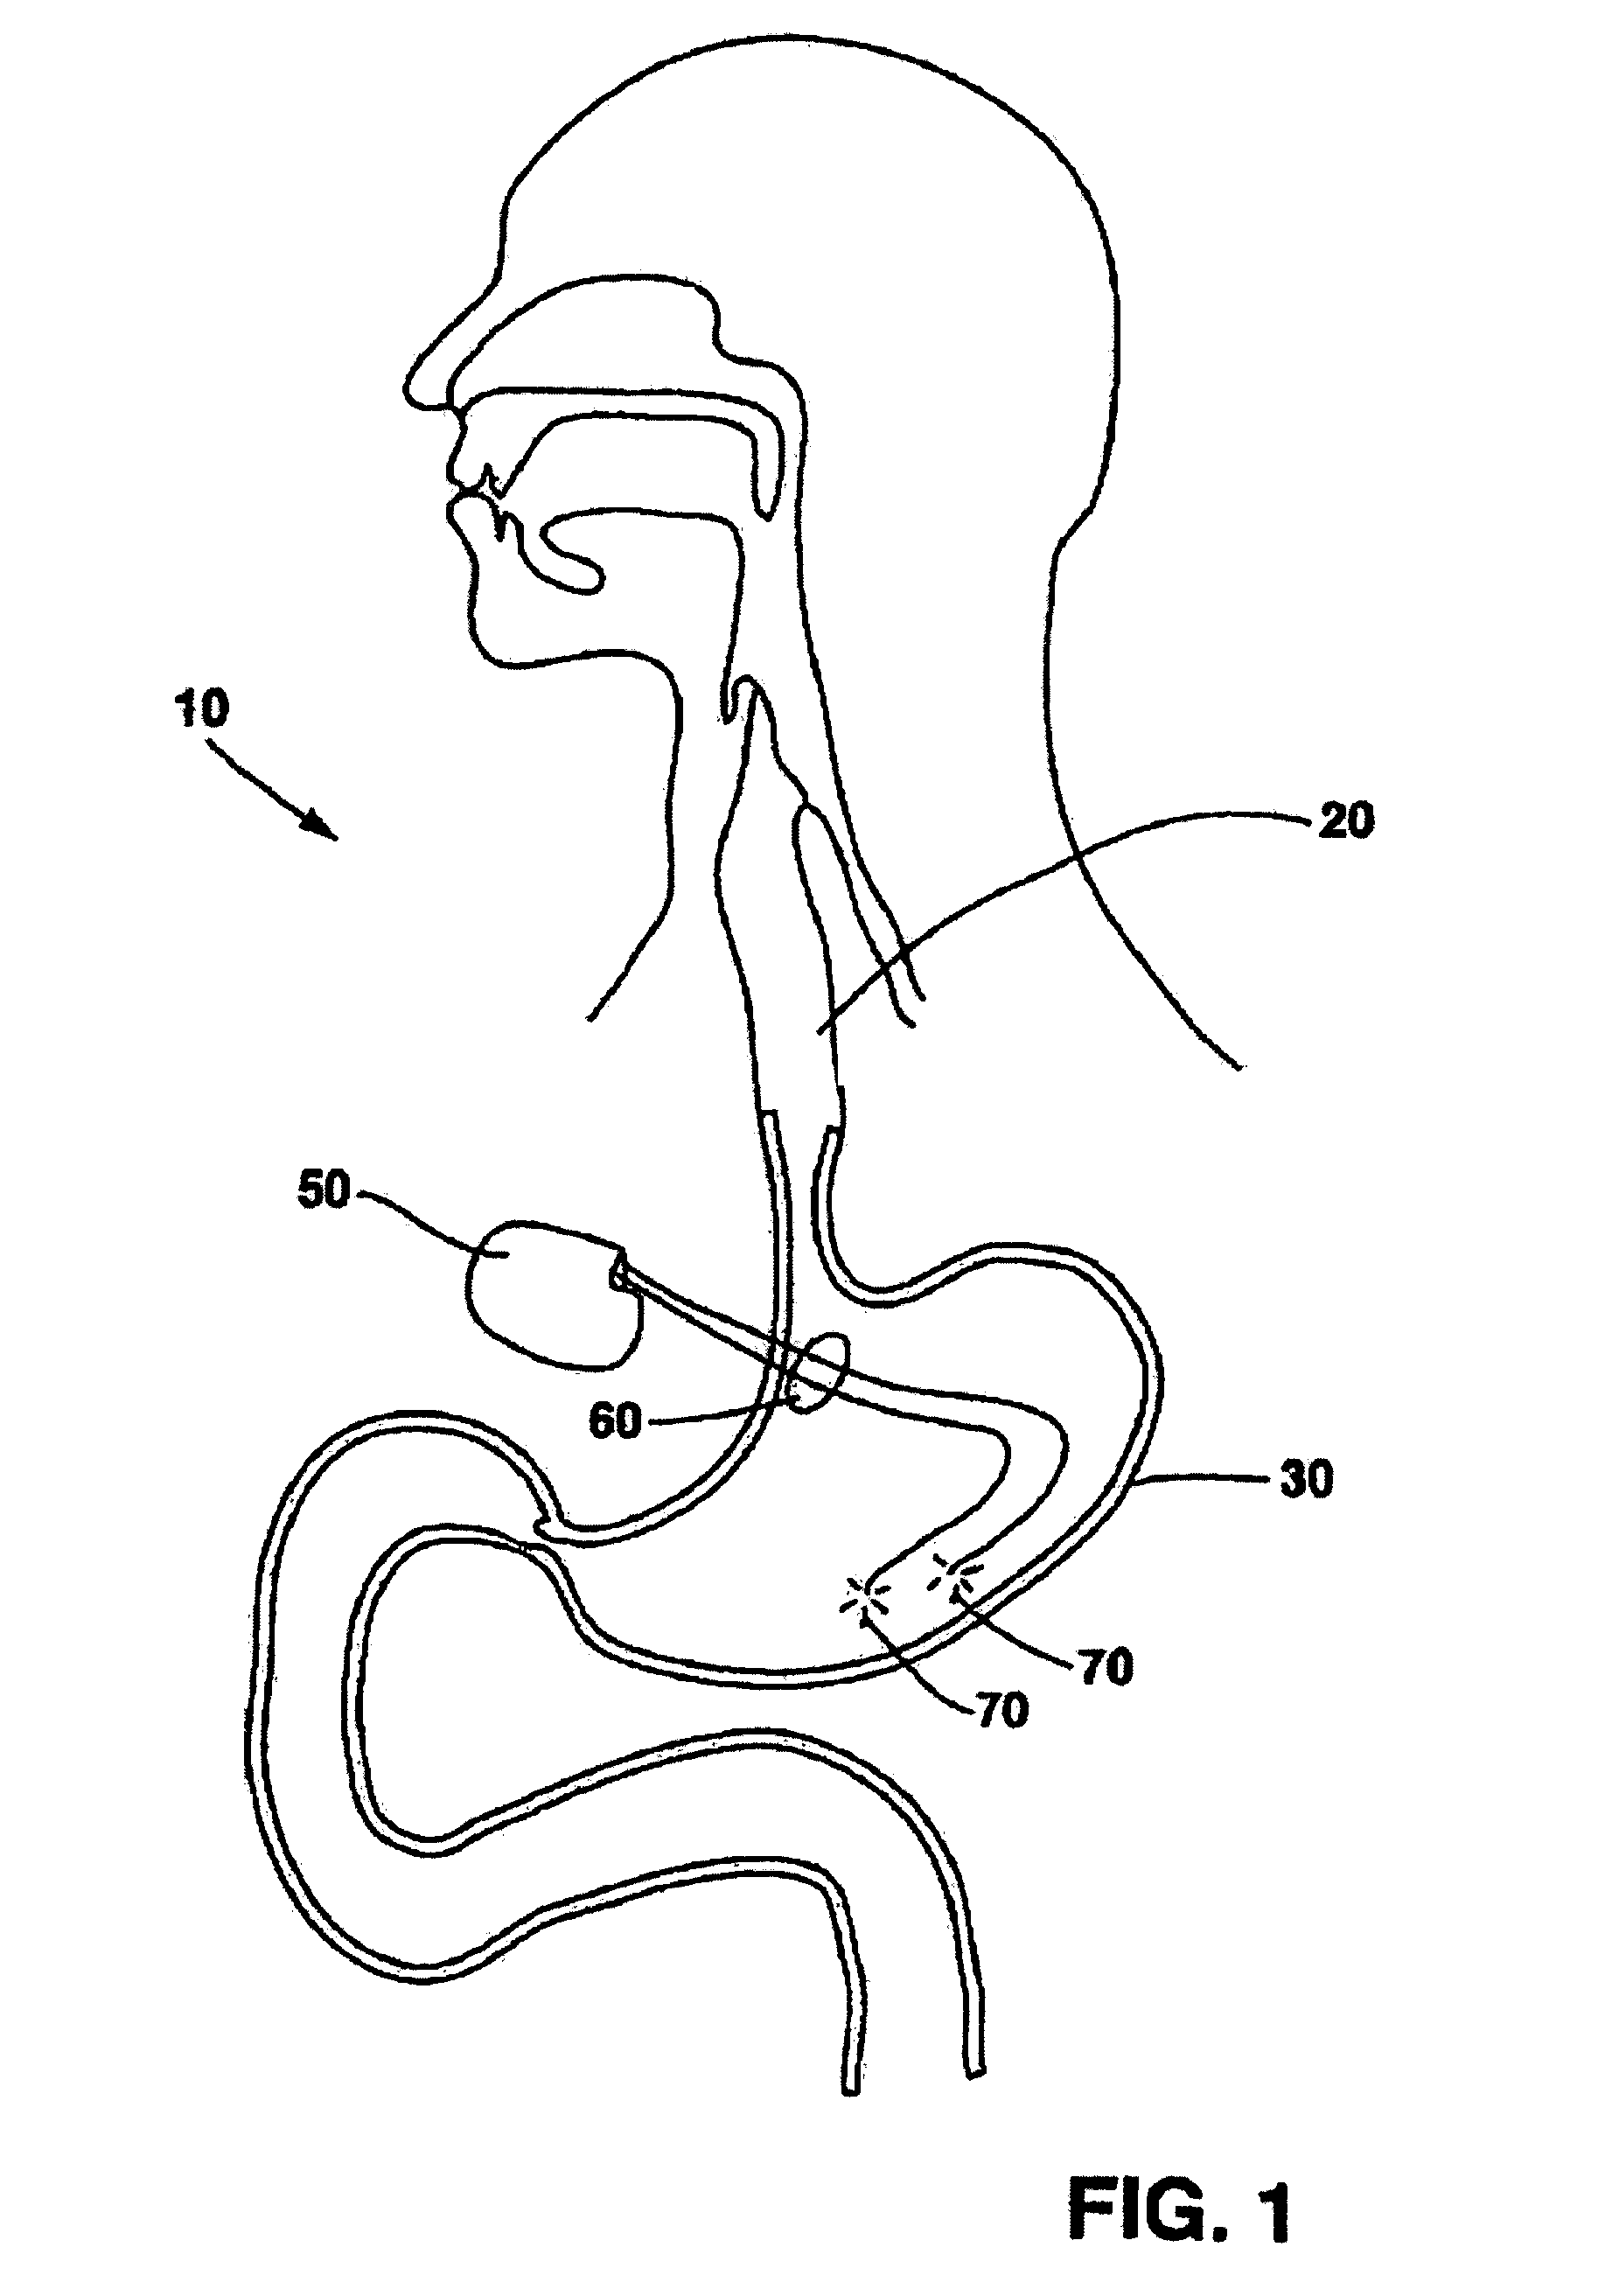 Implantable medical device with captivation fixation